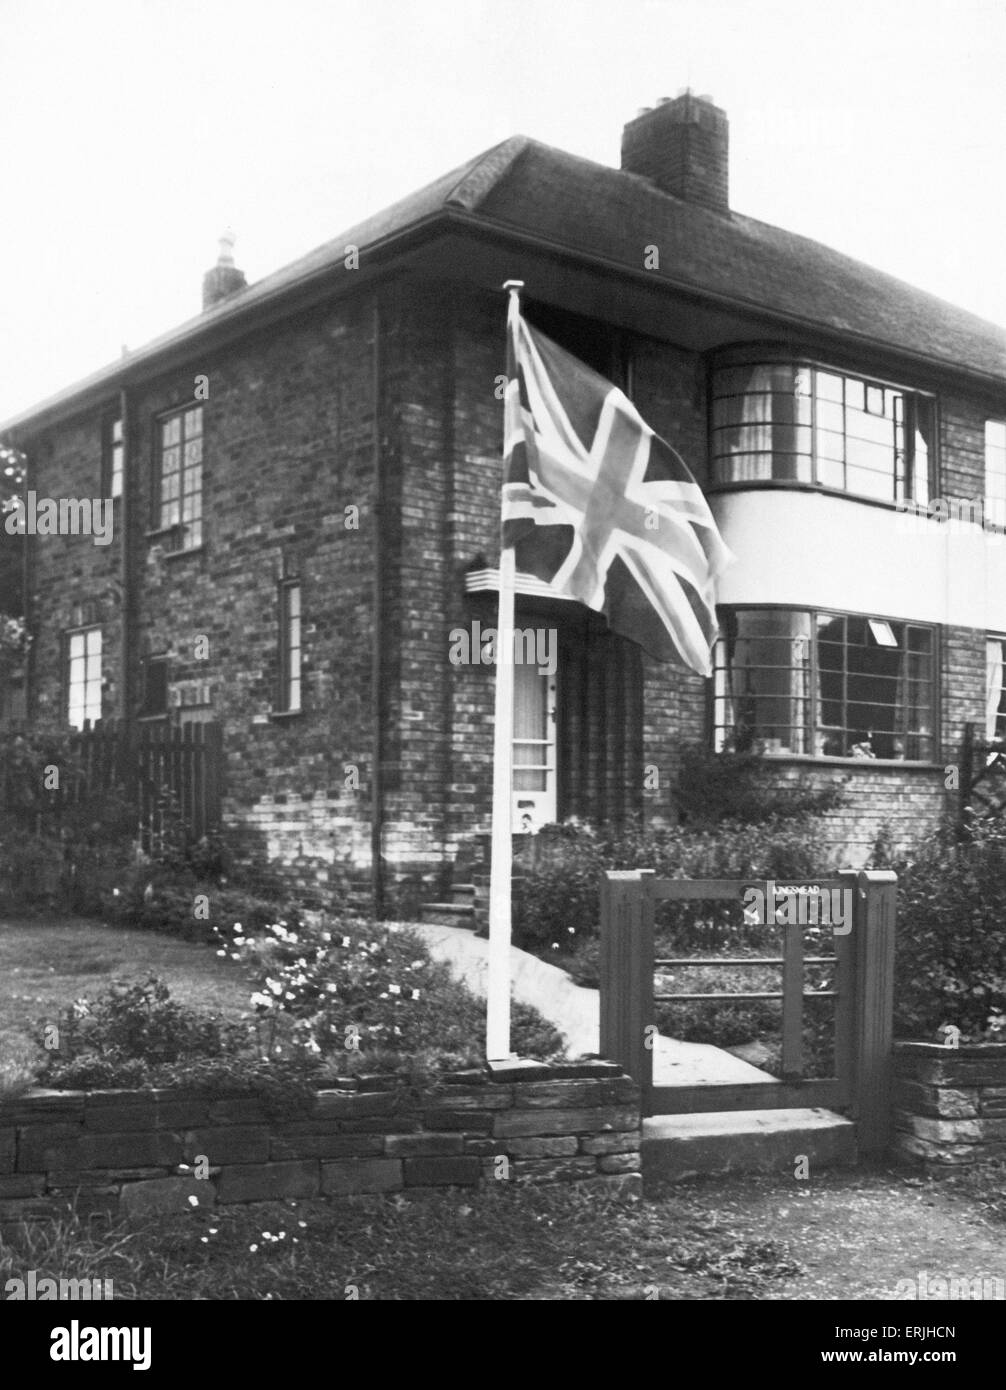 Australian cricket tour of England for the Ashes. The home of Len Hutton is Pudsey, Yorkshire, filies  the Union Jack flag after victory in the fifth and final test match at the Oval won the Ashes for England. 20th August 1953. Stock Photo